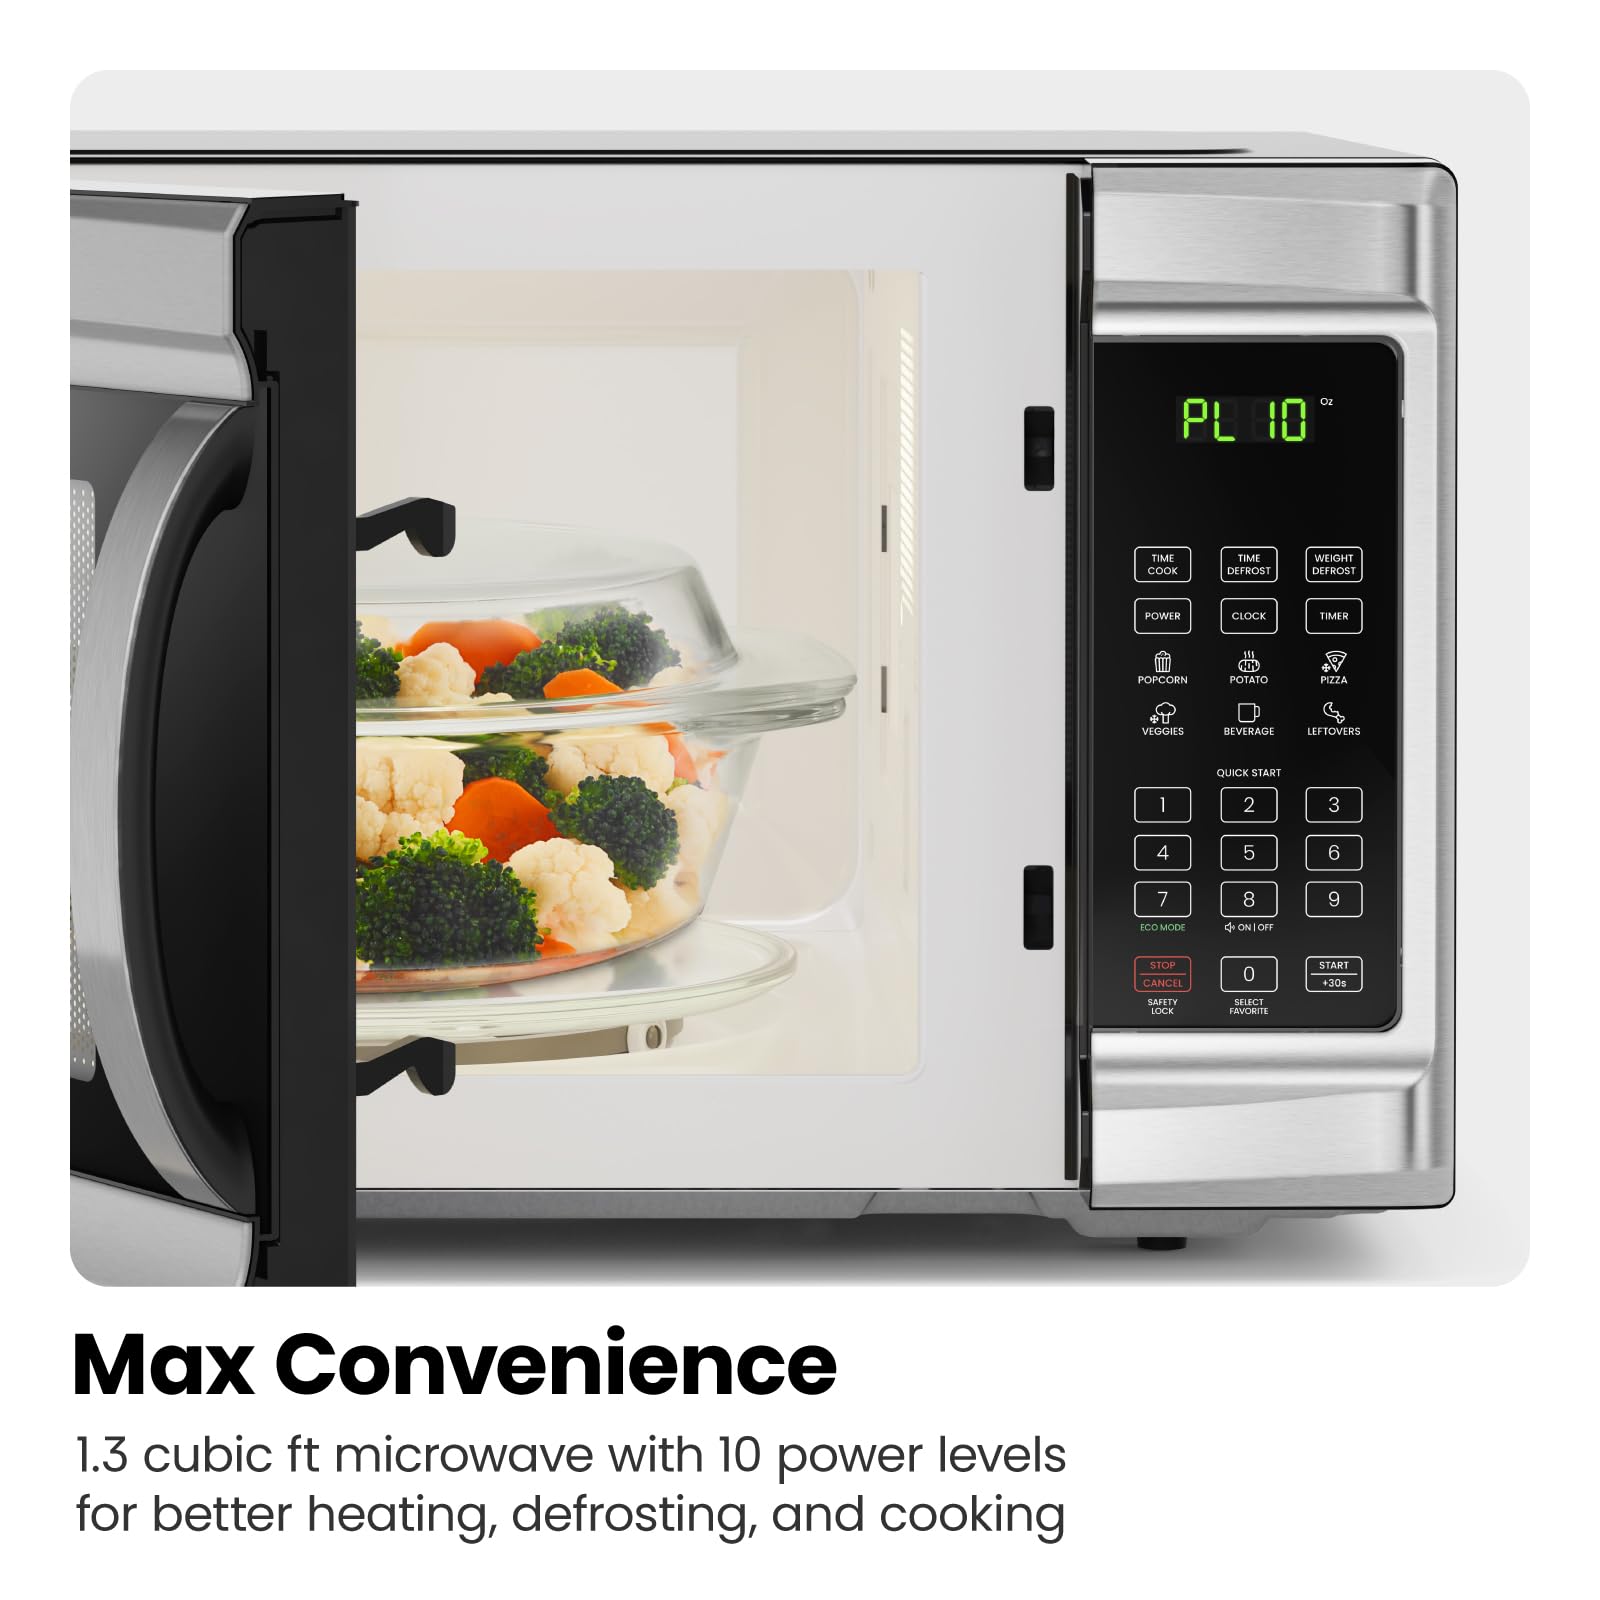 Chefman Countertop Microwave Oven, 1.3 Cu. Ft. Digital, Stainless Steel, 1000 Watts, with 6 Auto Menus, 10 Power Levels, Eco Mode, Memory, Mute Function, Child Safety Lock, Easy Clean Microwave Ovens